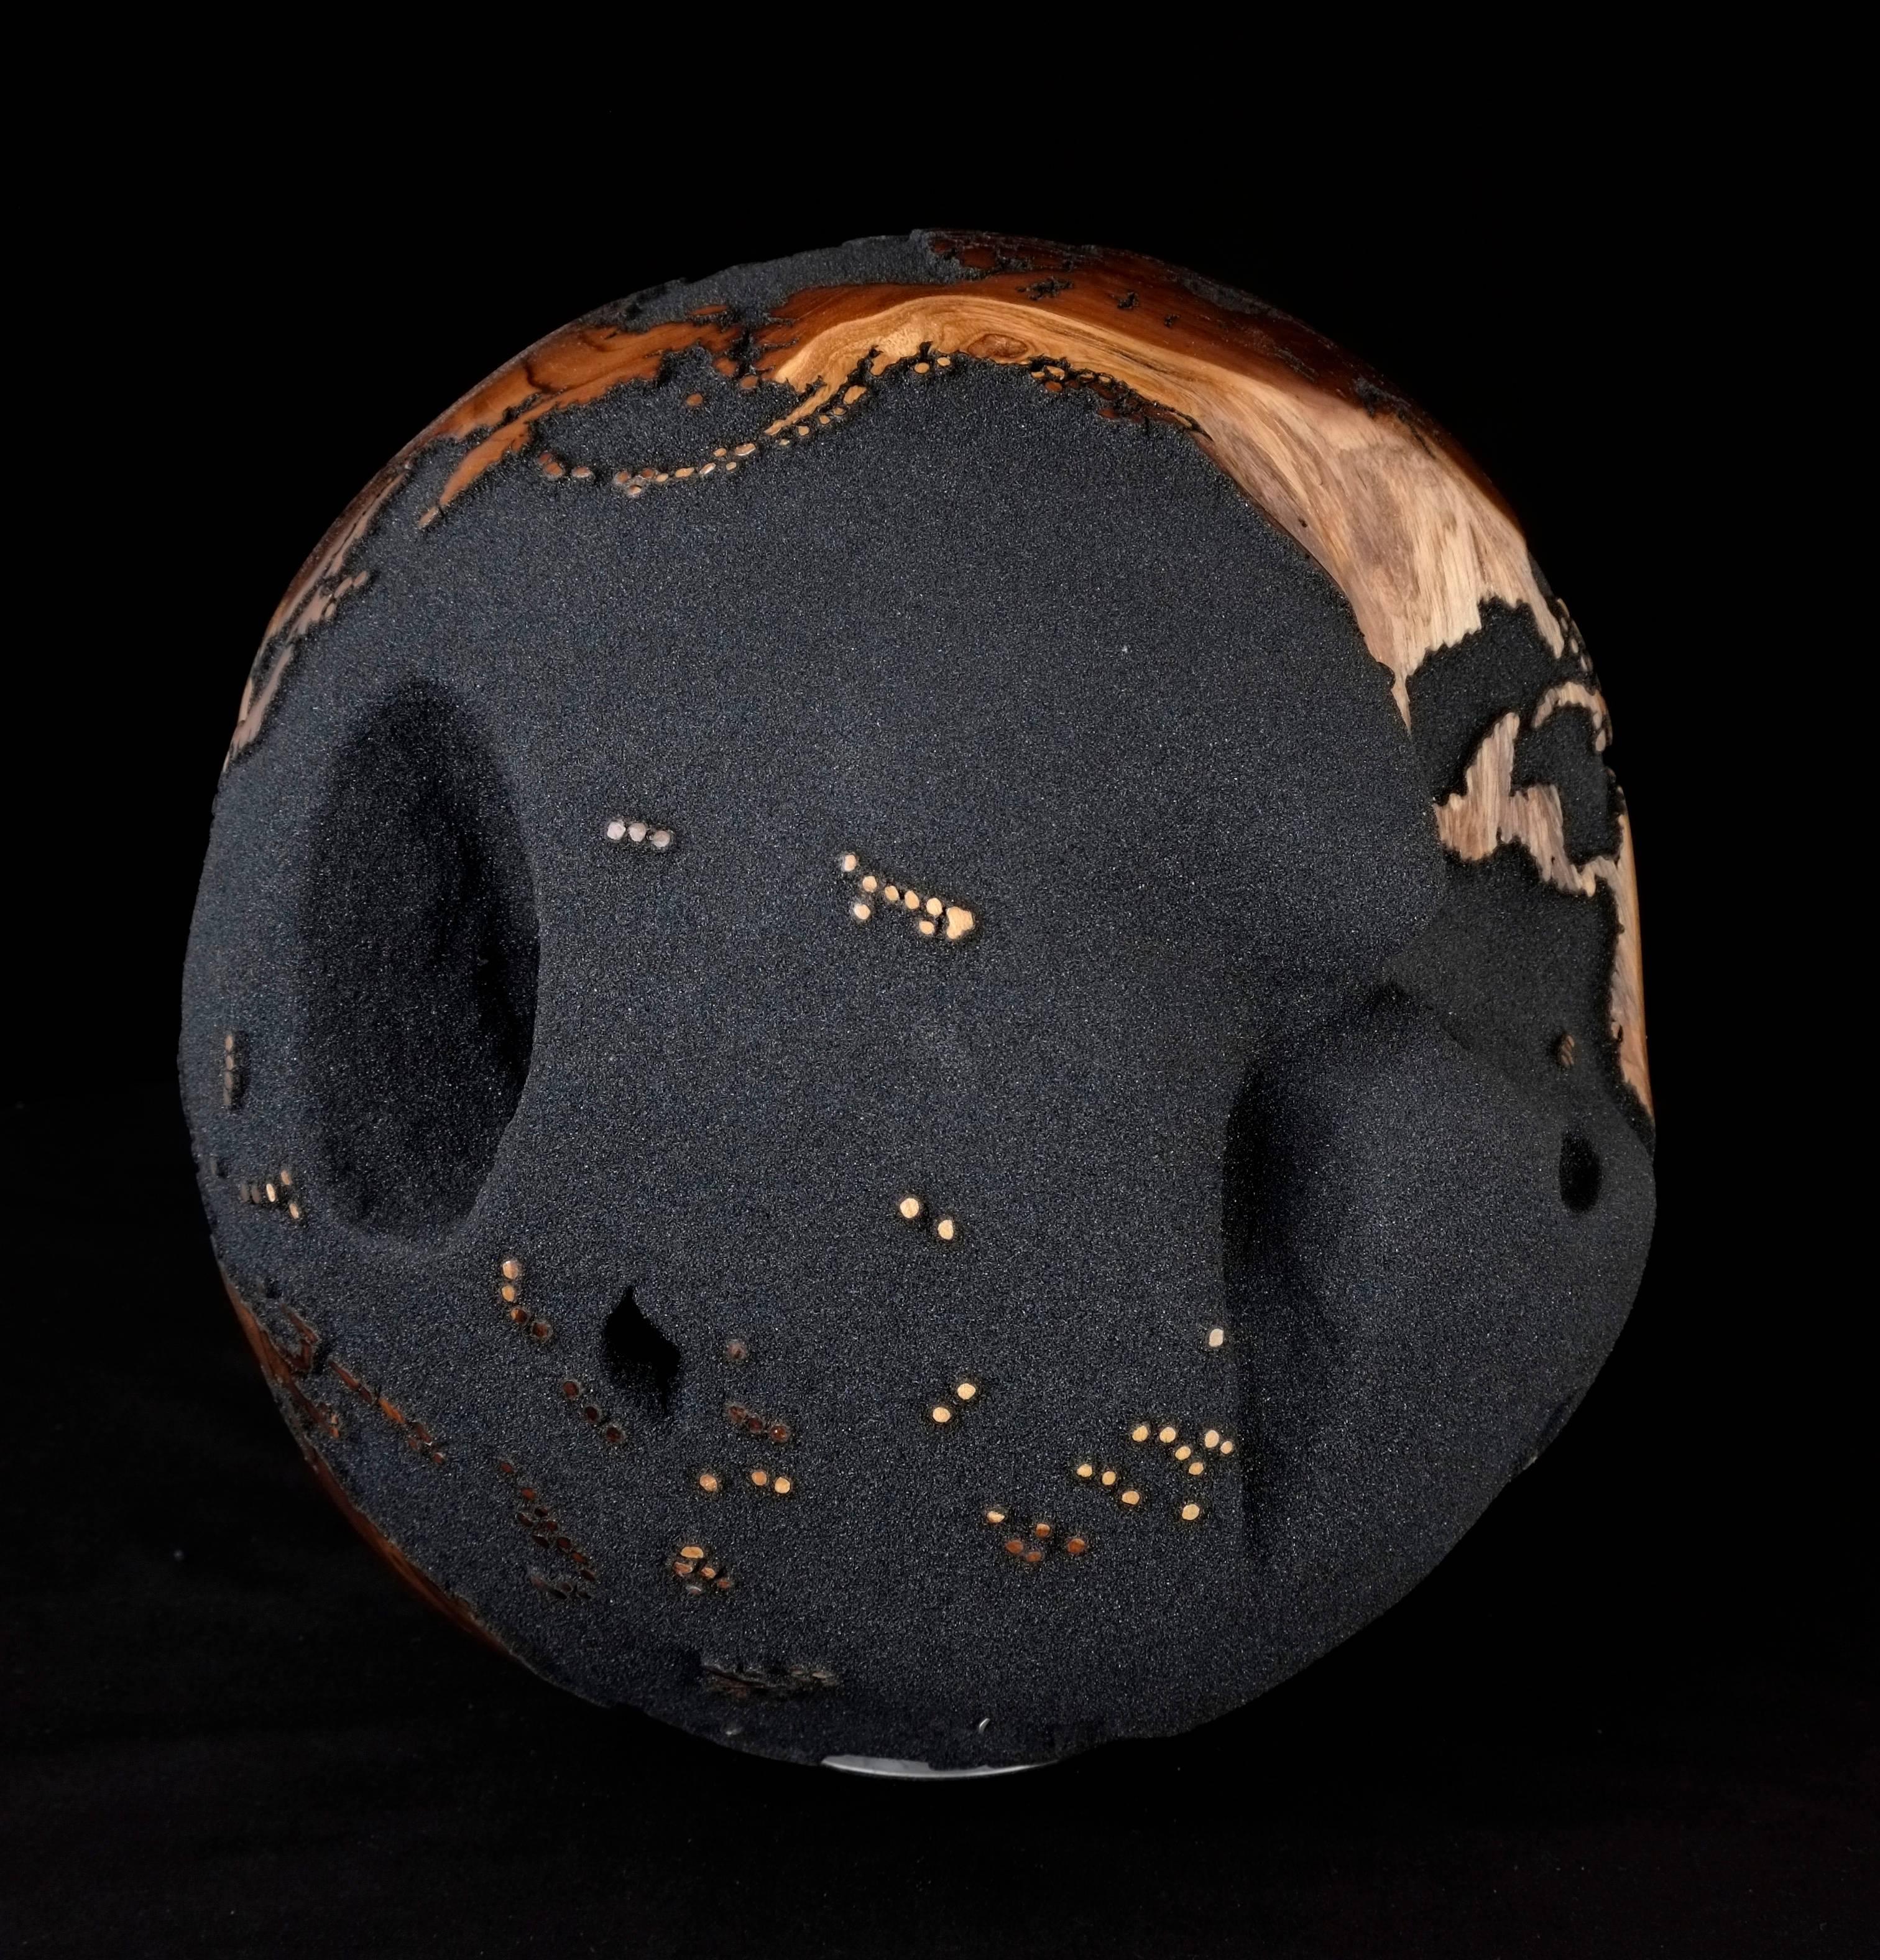 Appliqué Contemporary Globe in Teak Root with Volcanic Sand and Natural Holes, 30cm